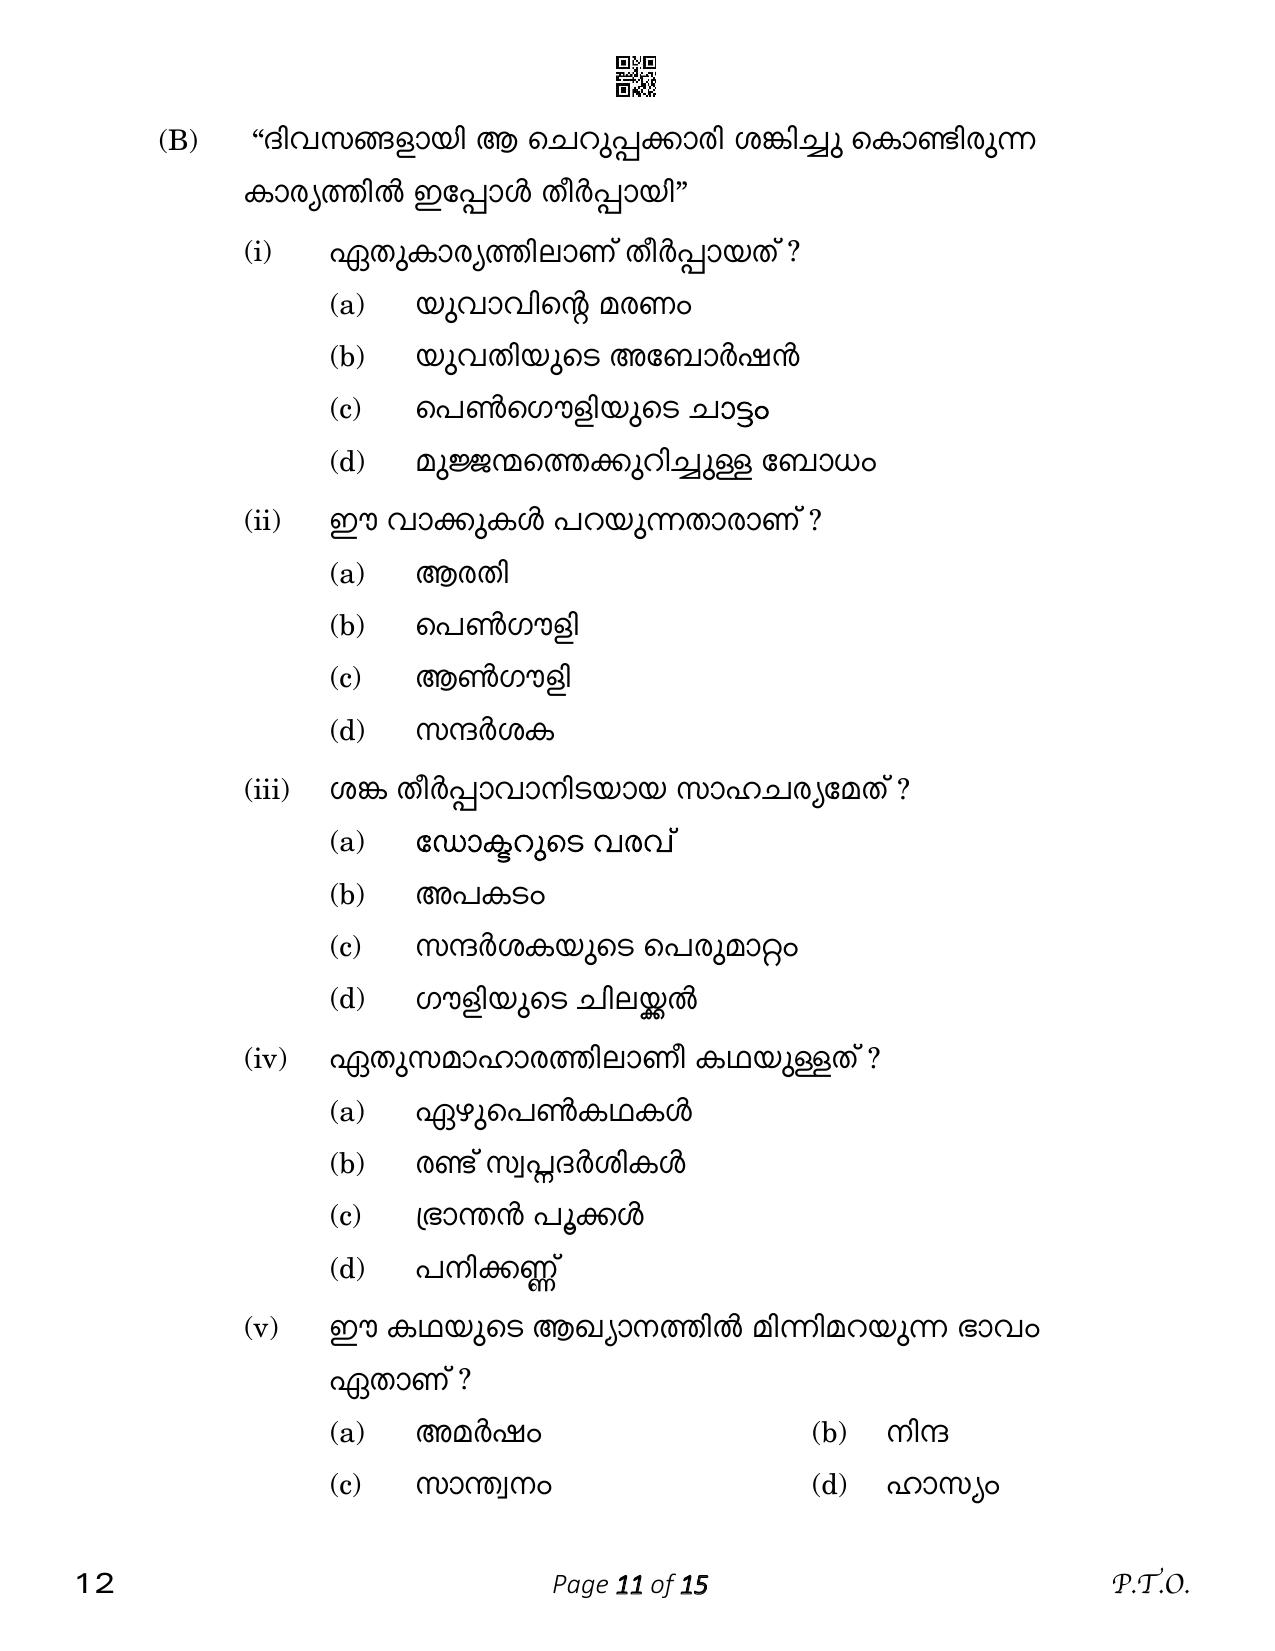 CBSE Class 12 Malayalam (Compartment) 2023 Question Paper - Page 11